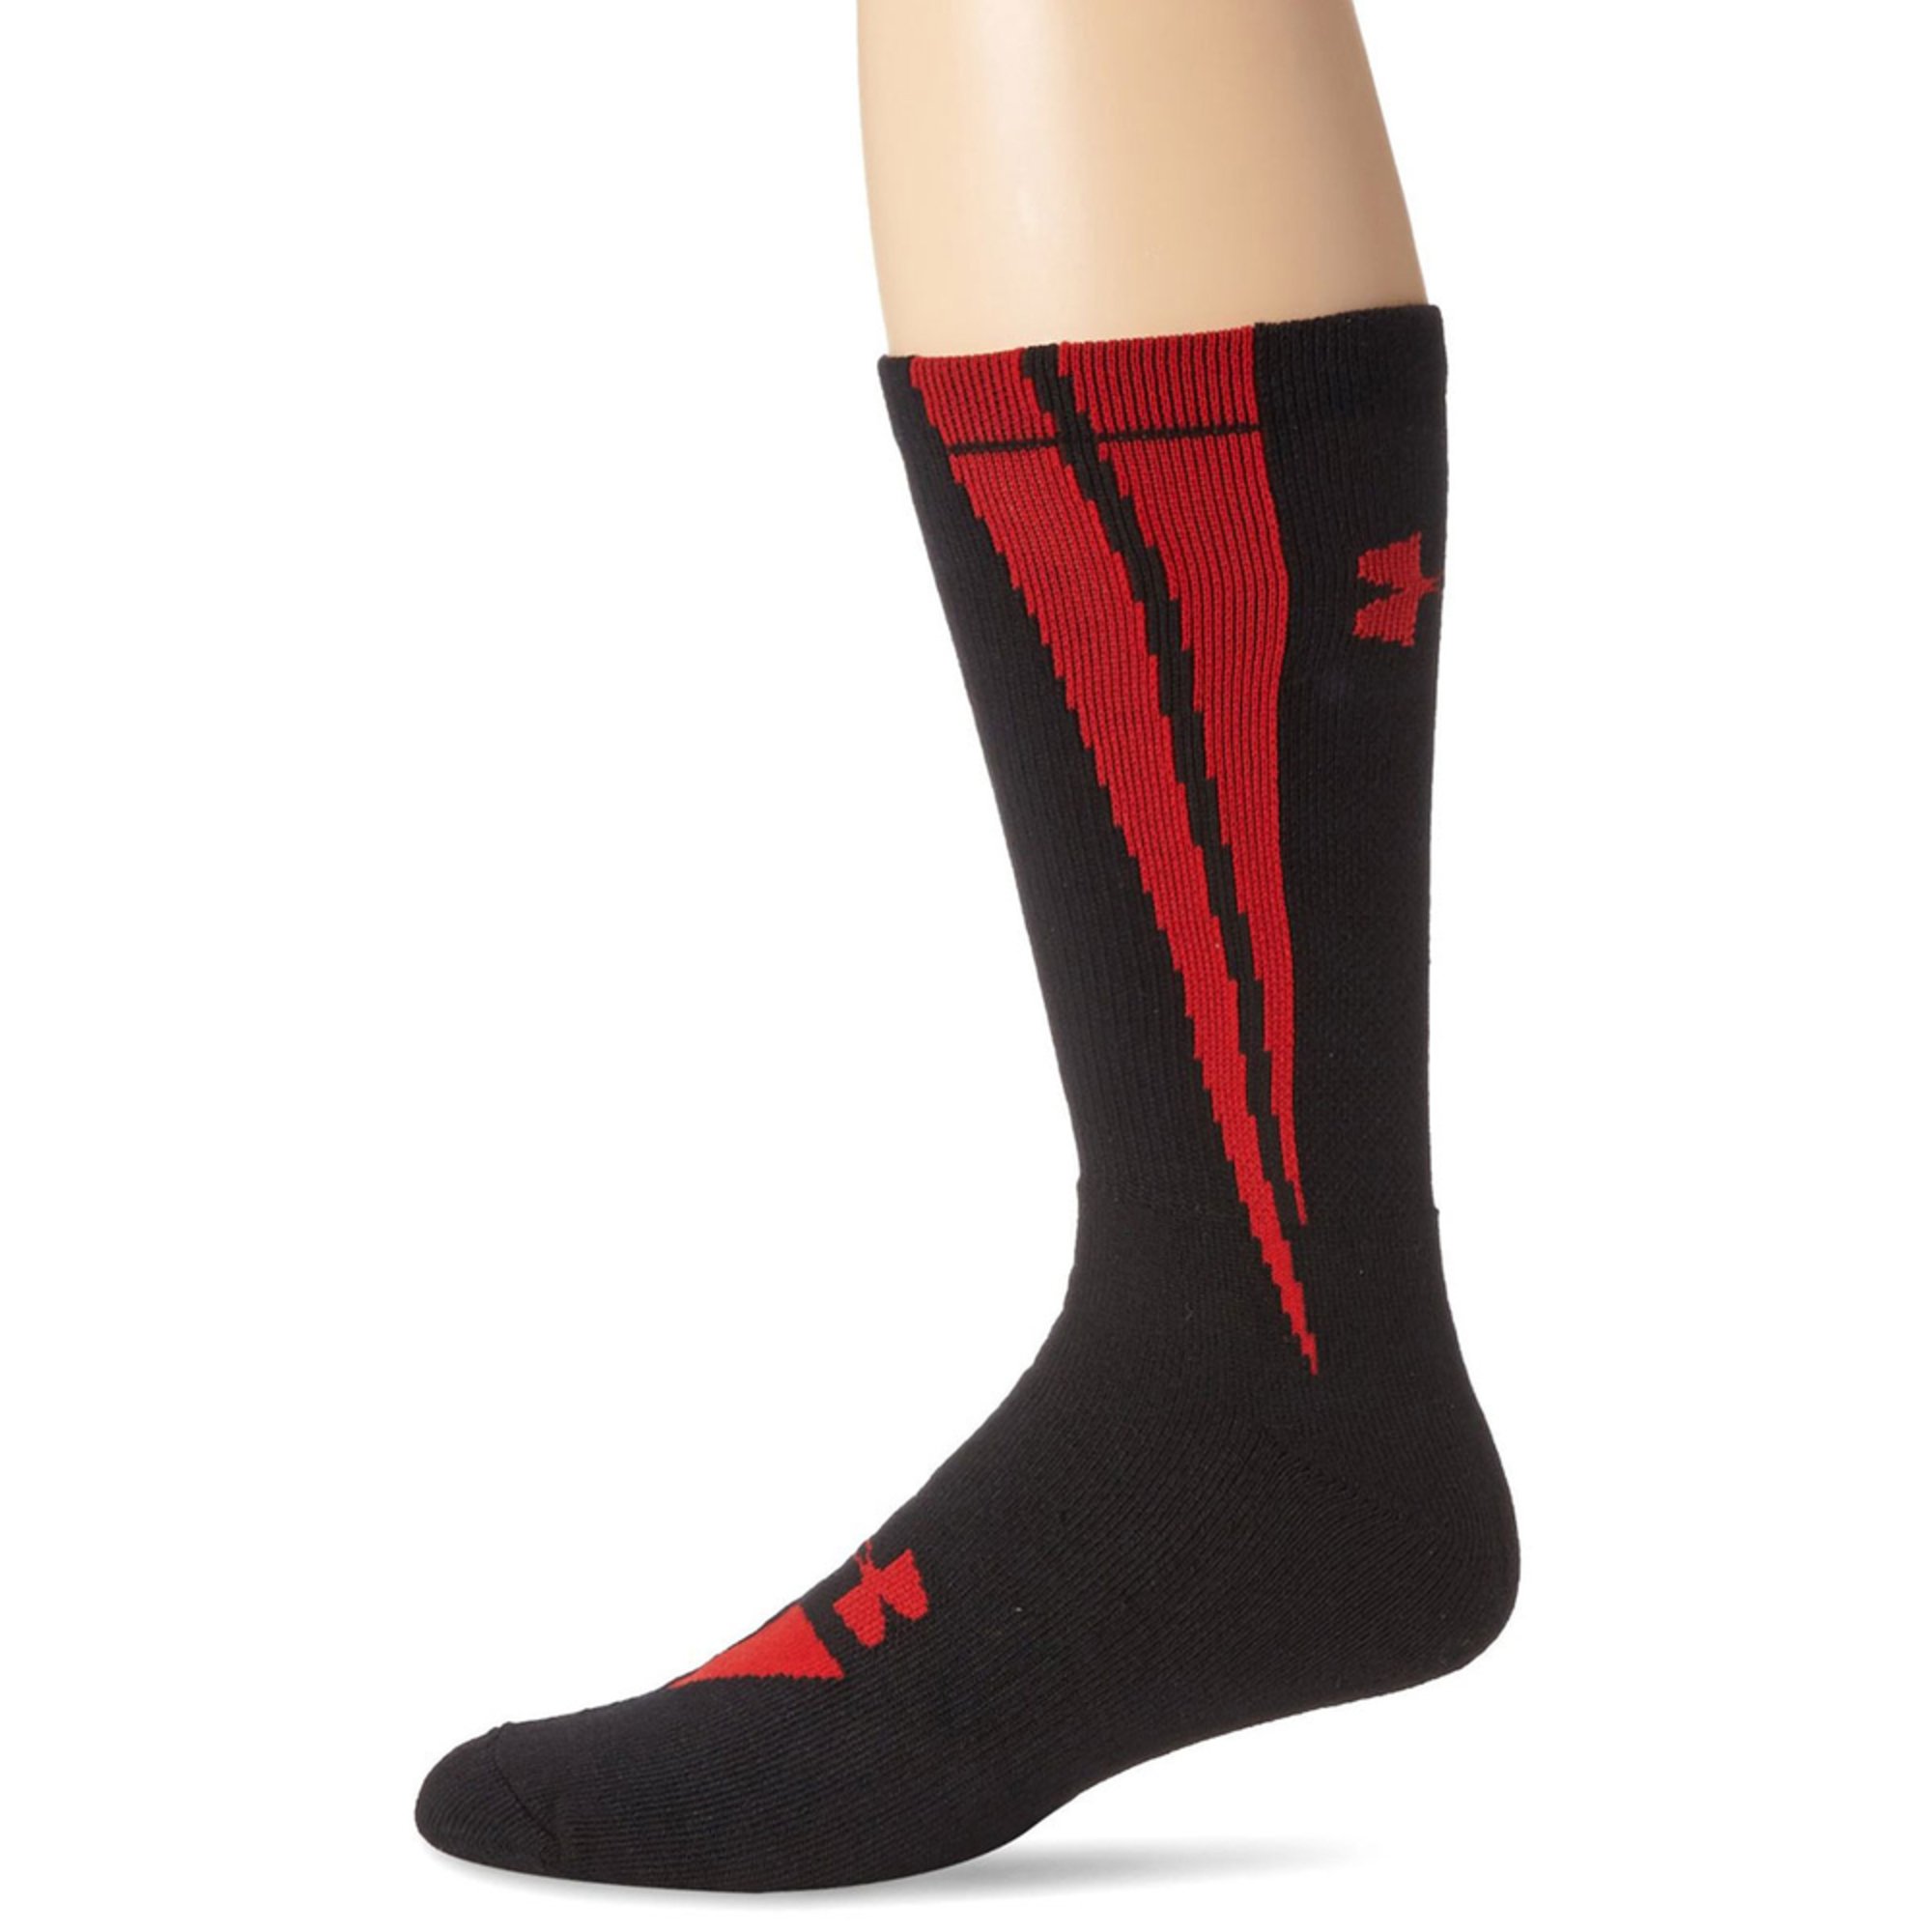 under armour under armour socks based on 0 reviews msrp $ 12 99 color ...